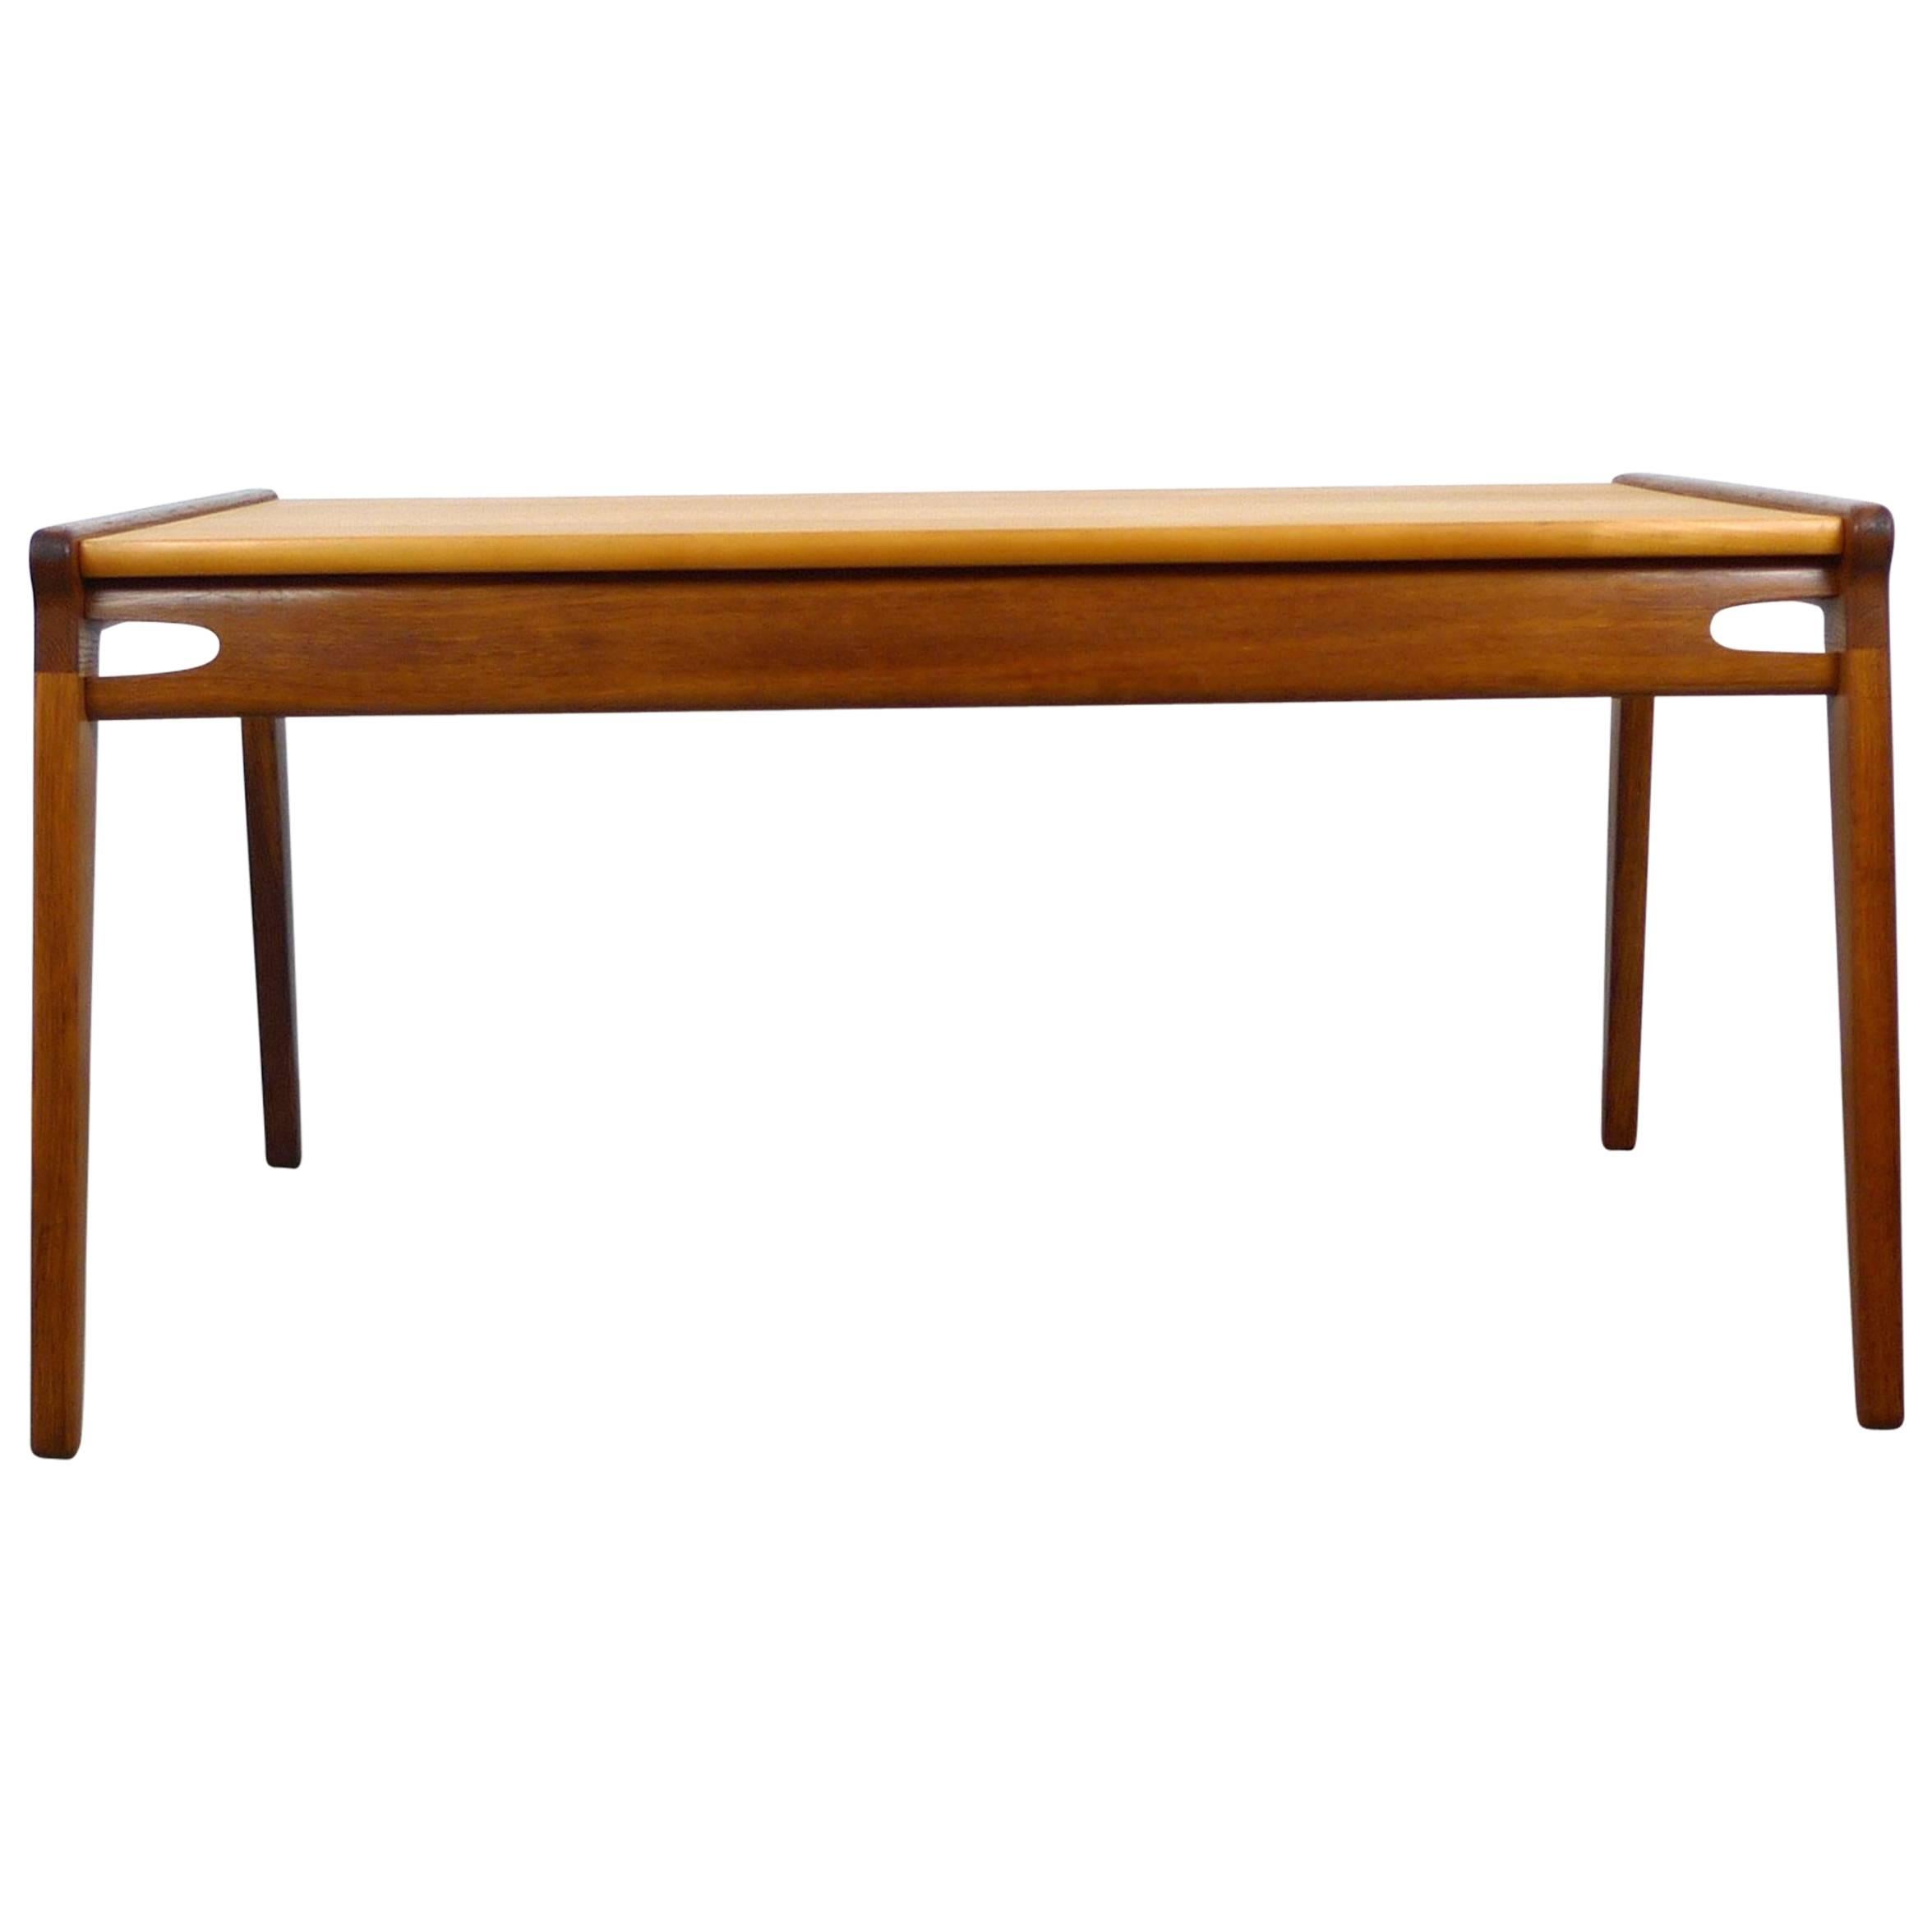 1950s Coffee Table from Germany